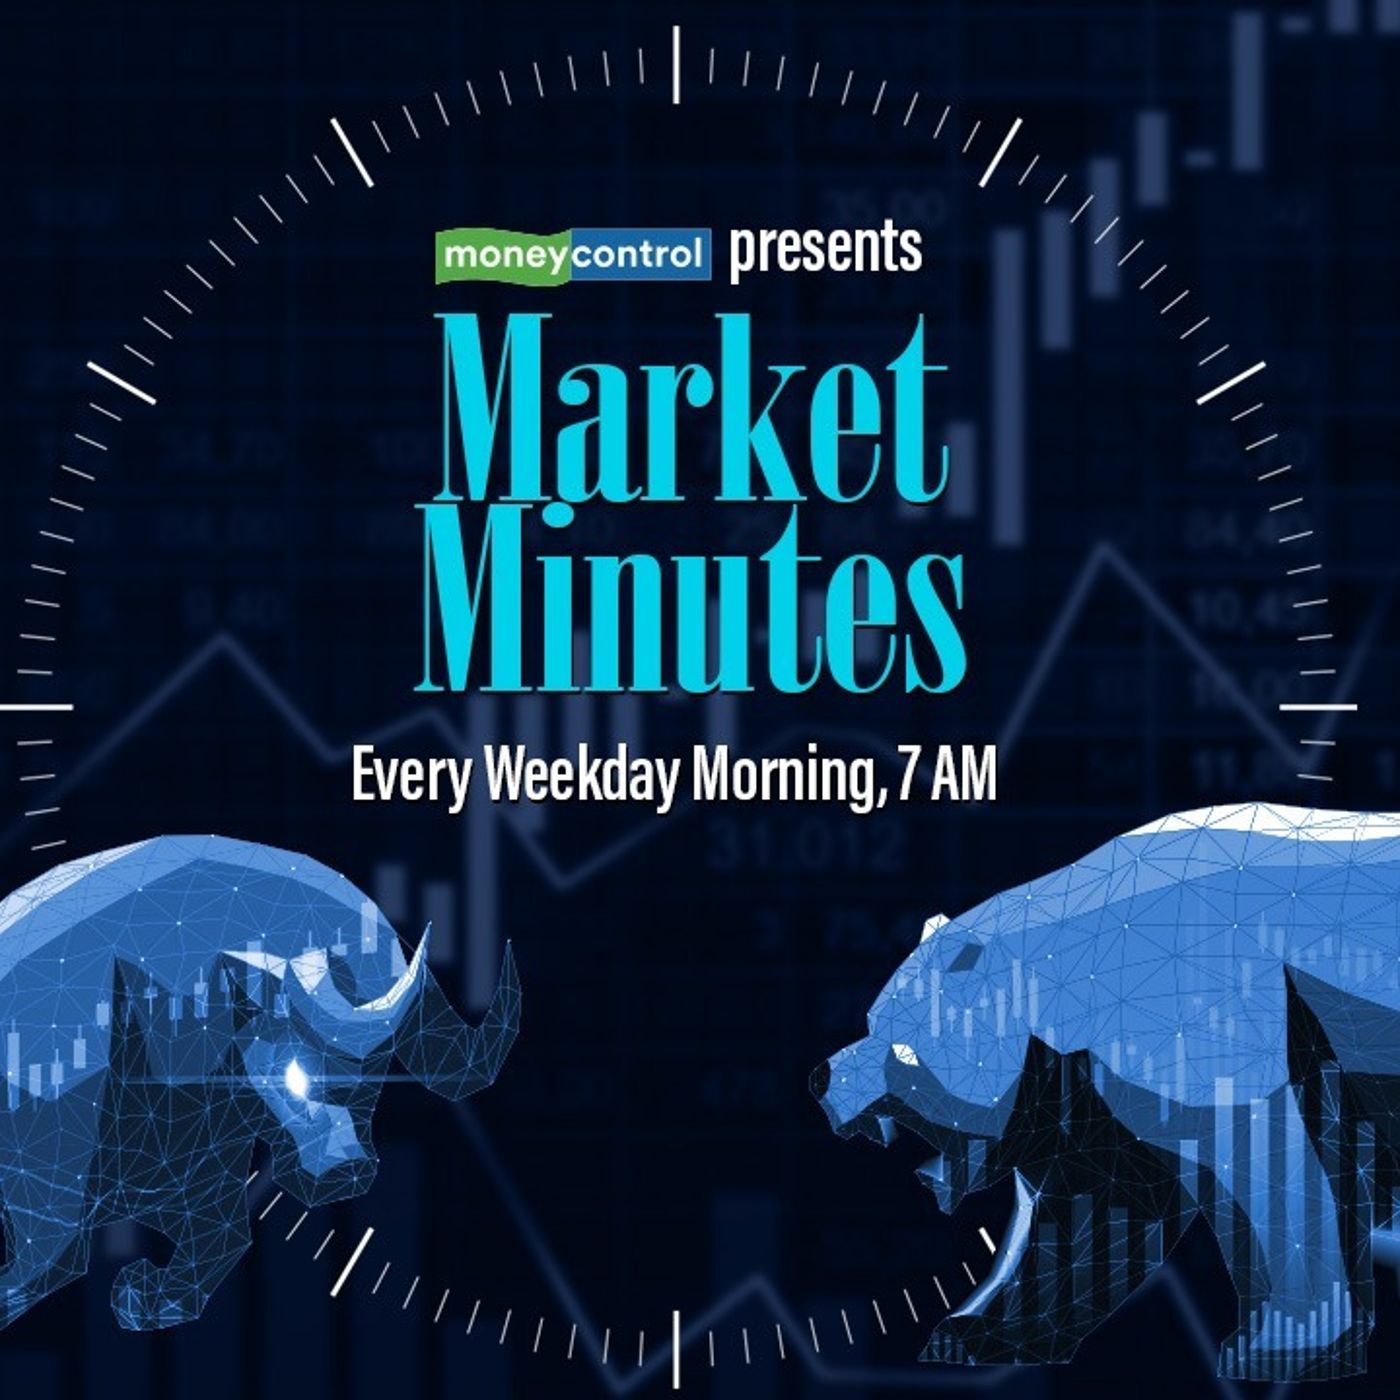 4223: Nifty, Sensex may fall on reports of blasts in Iran; GIFT Nifty, Asian indices tank, crude jumps 3% | Market Minutes